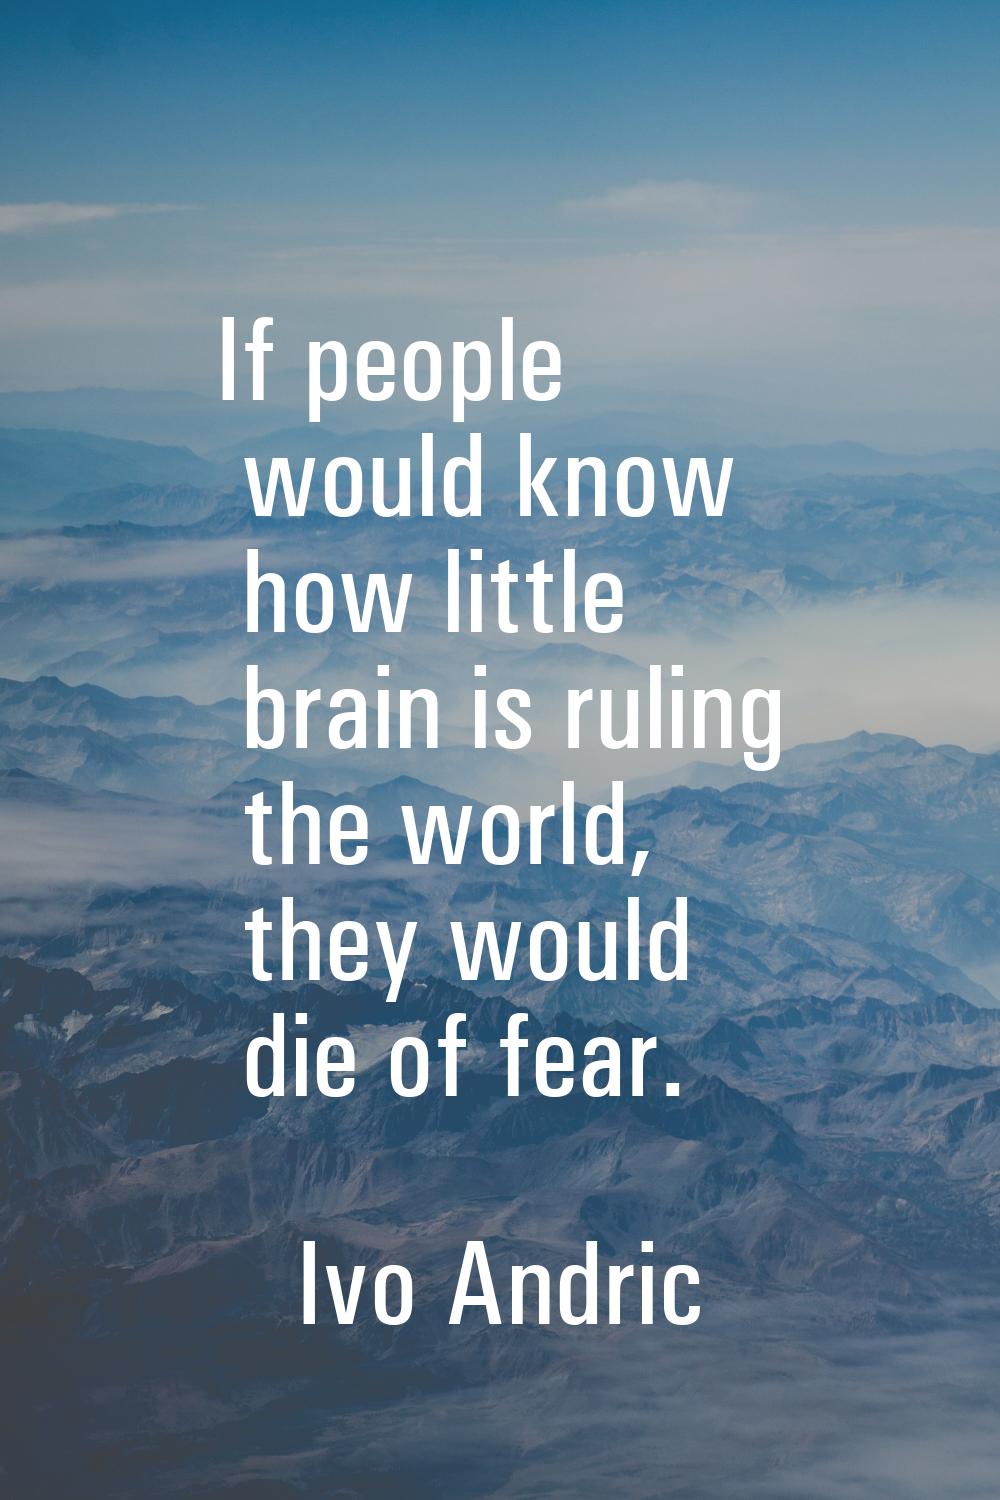 If people would know how little brain is ruling the world, they would die of fear.